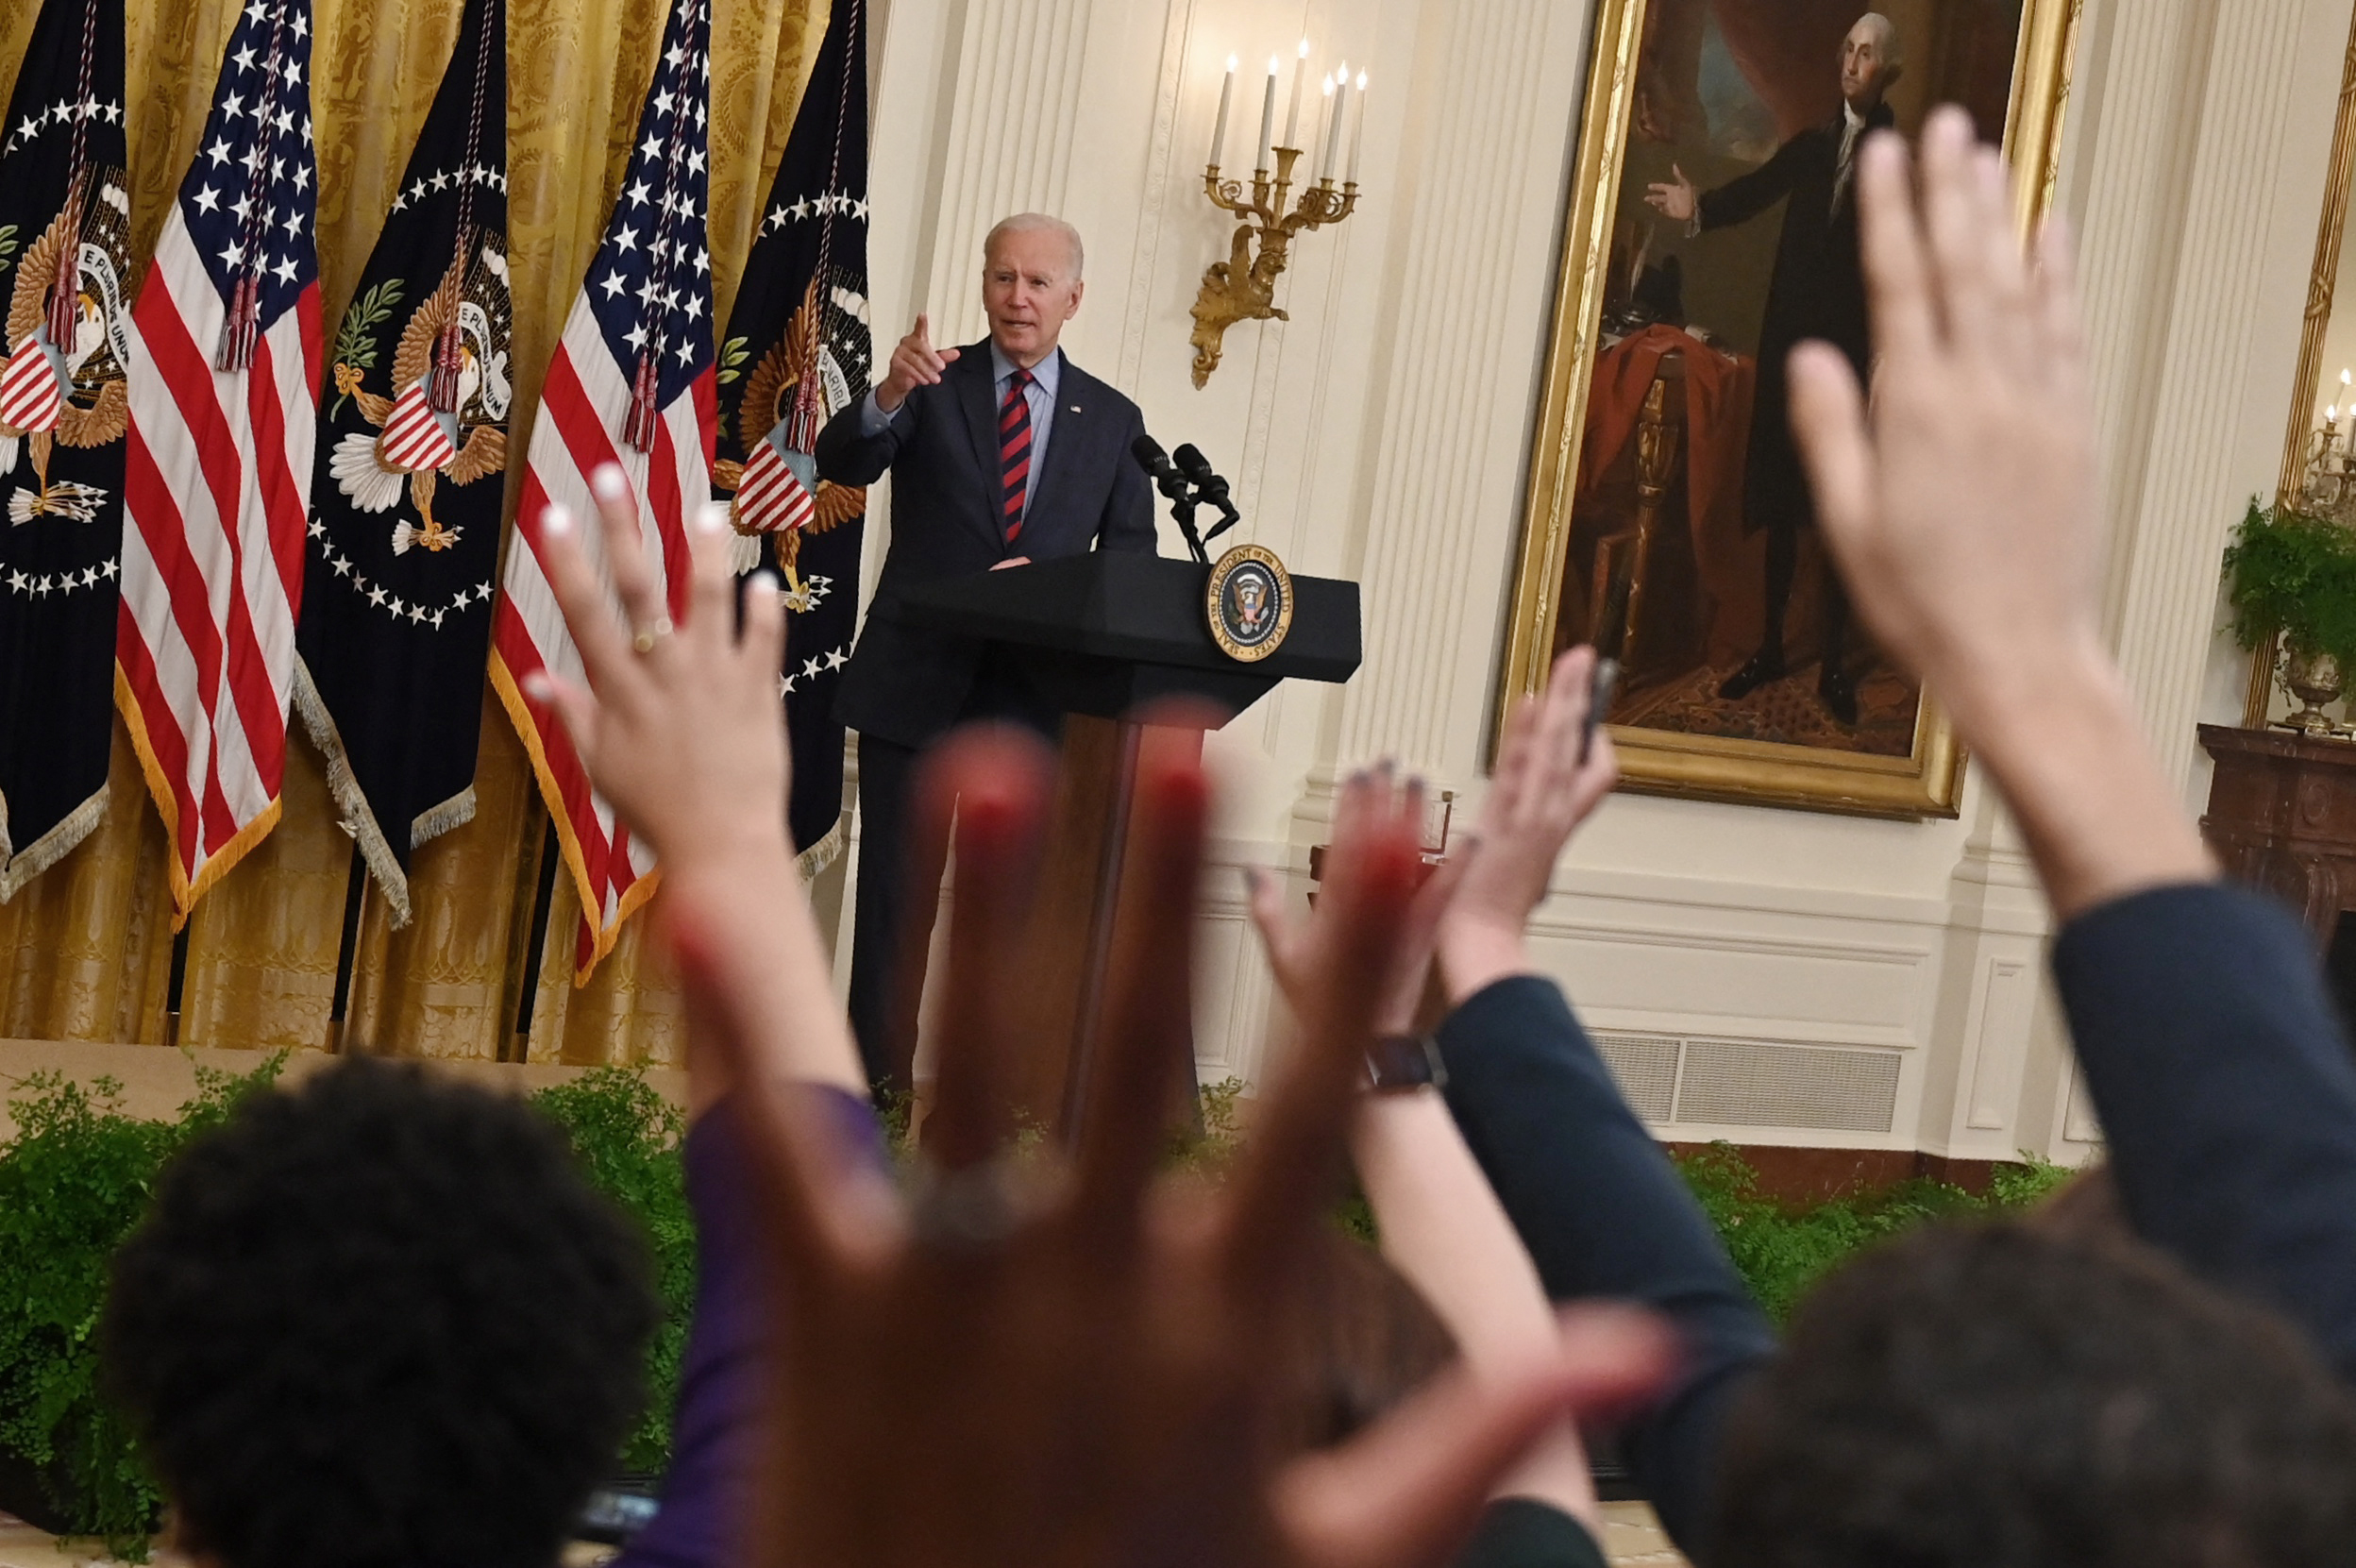 Reporters raise their hands after President Joe Biden speaks about vaccinations and the economy Tuesday. (Jim Watson/AFP via Getty Images)